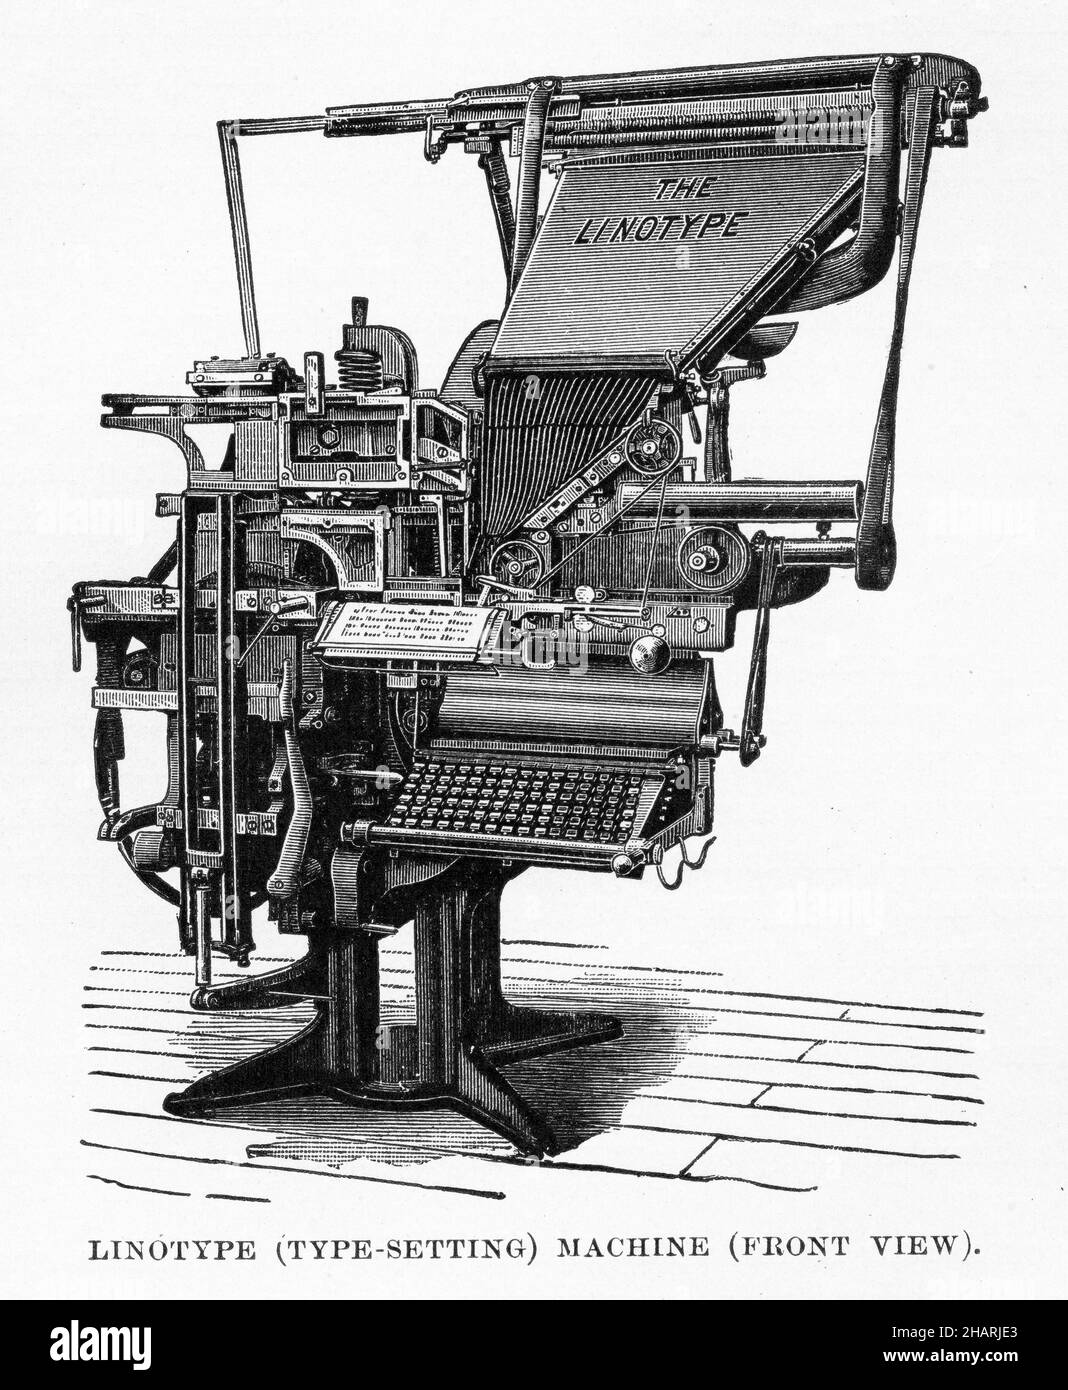 19th century type-setting machine for the printing industry Stock Photo